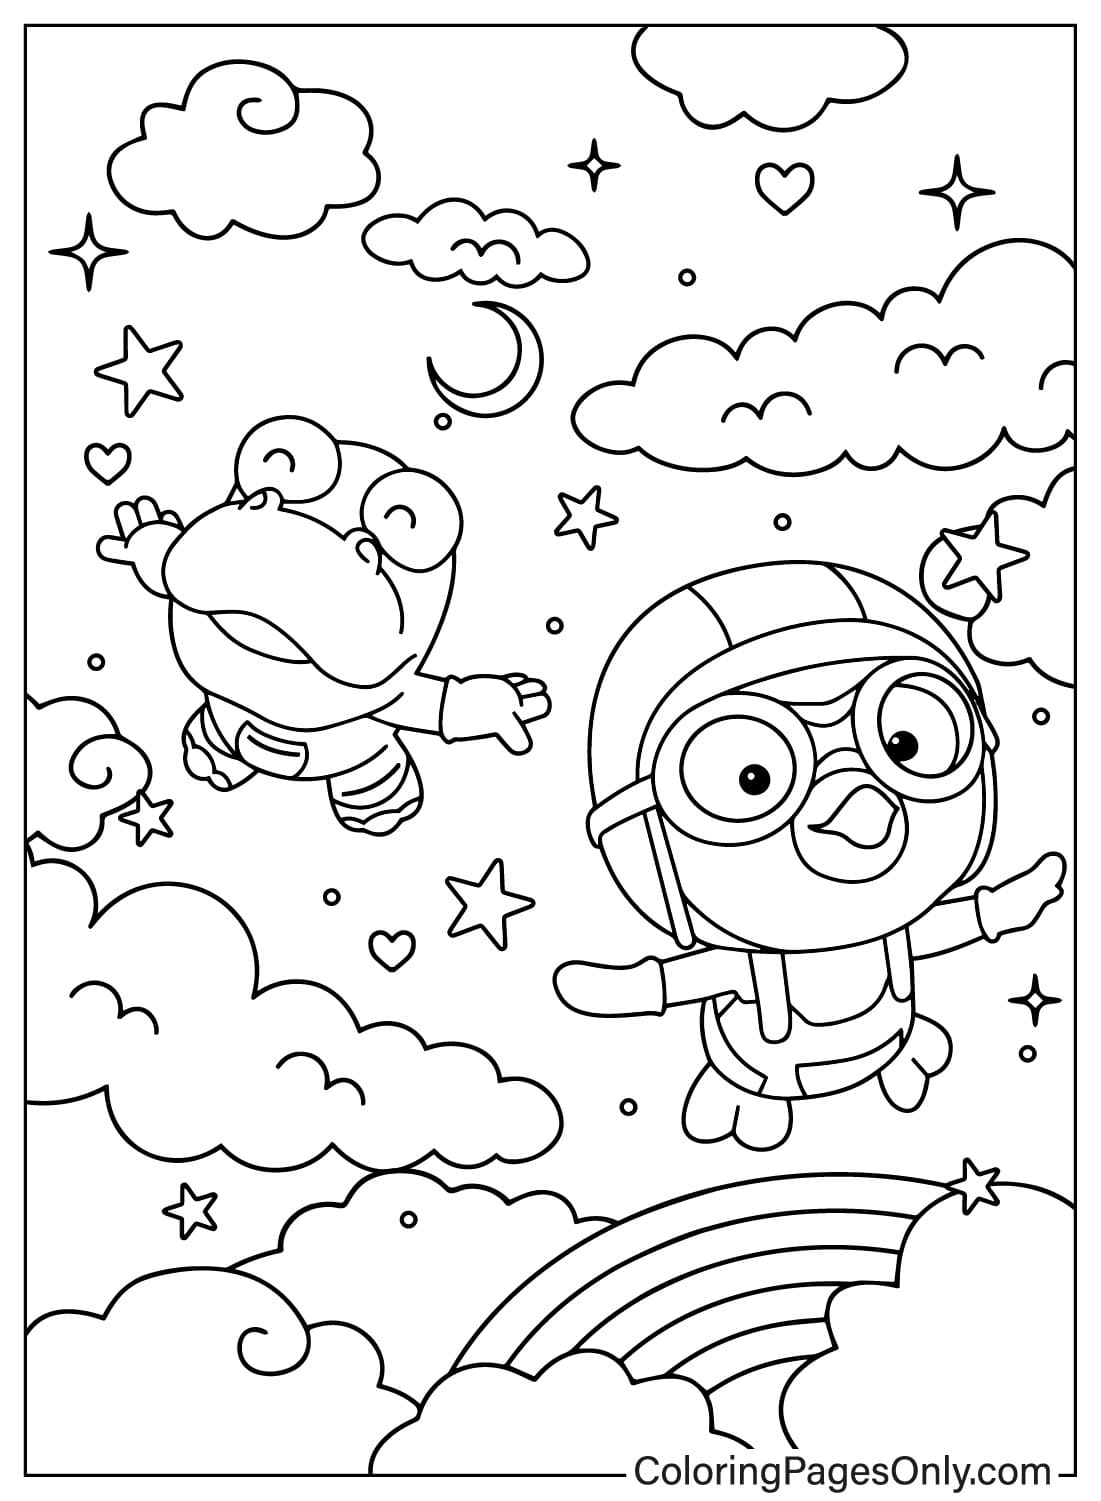 Pororo the Little Penguin Images to Color from Pororo the Little Penguin